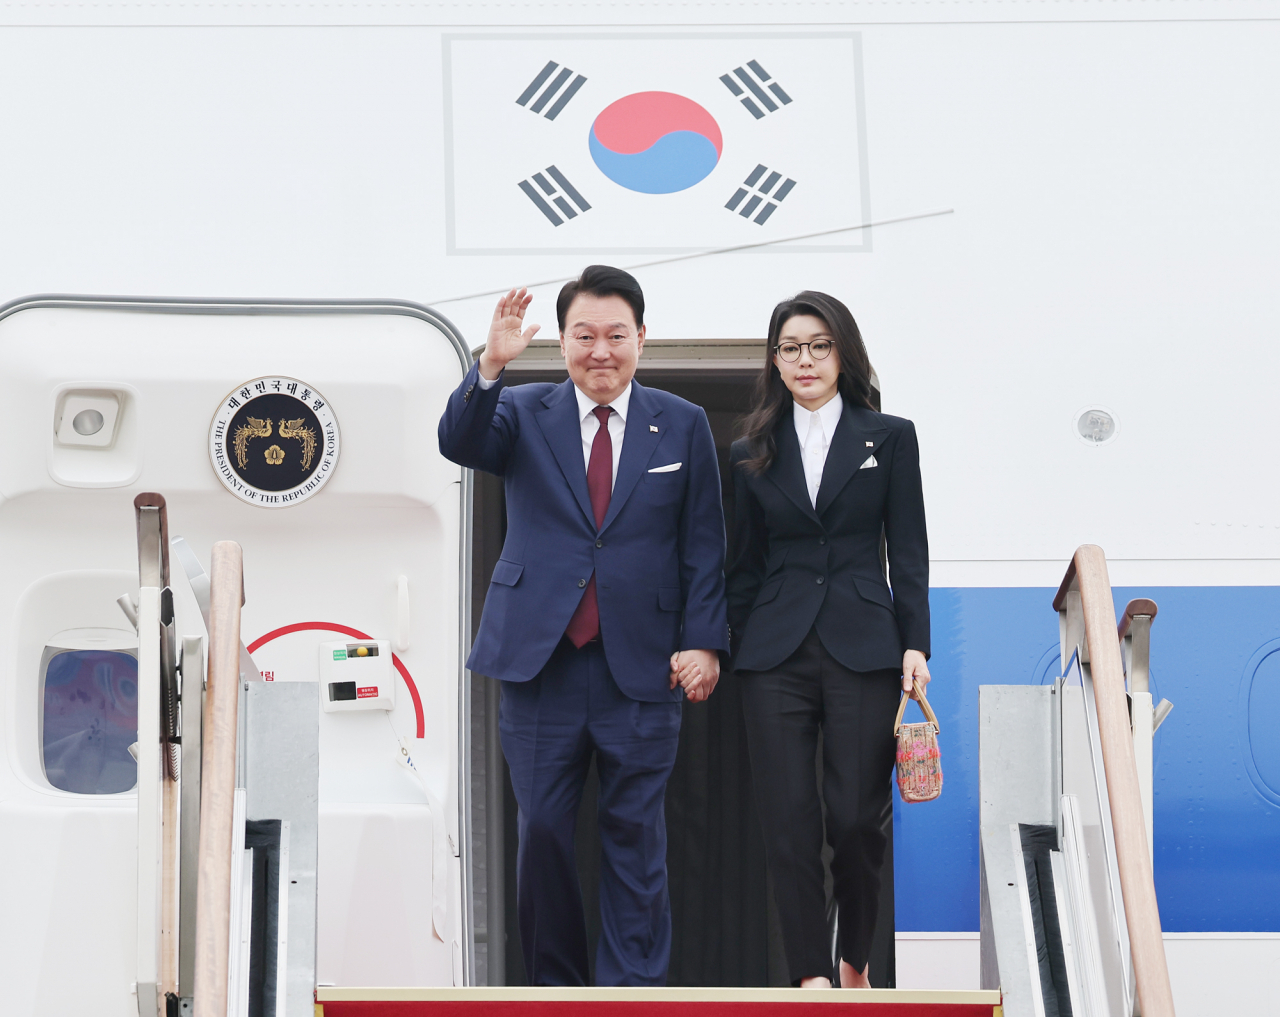 President Yoon Suk Yeol (left), alongside his wife, Kim Keon Hee, disembarks from the presidential plane at Seoul Air Base in Seongnam, south of Seoul, on Thursday, after finishing a two-nation state visit that took him to Saudi Arabia and Qatar. (Yonhap)